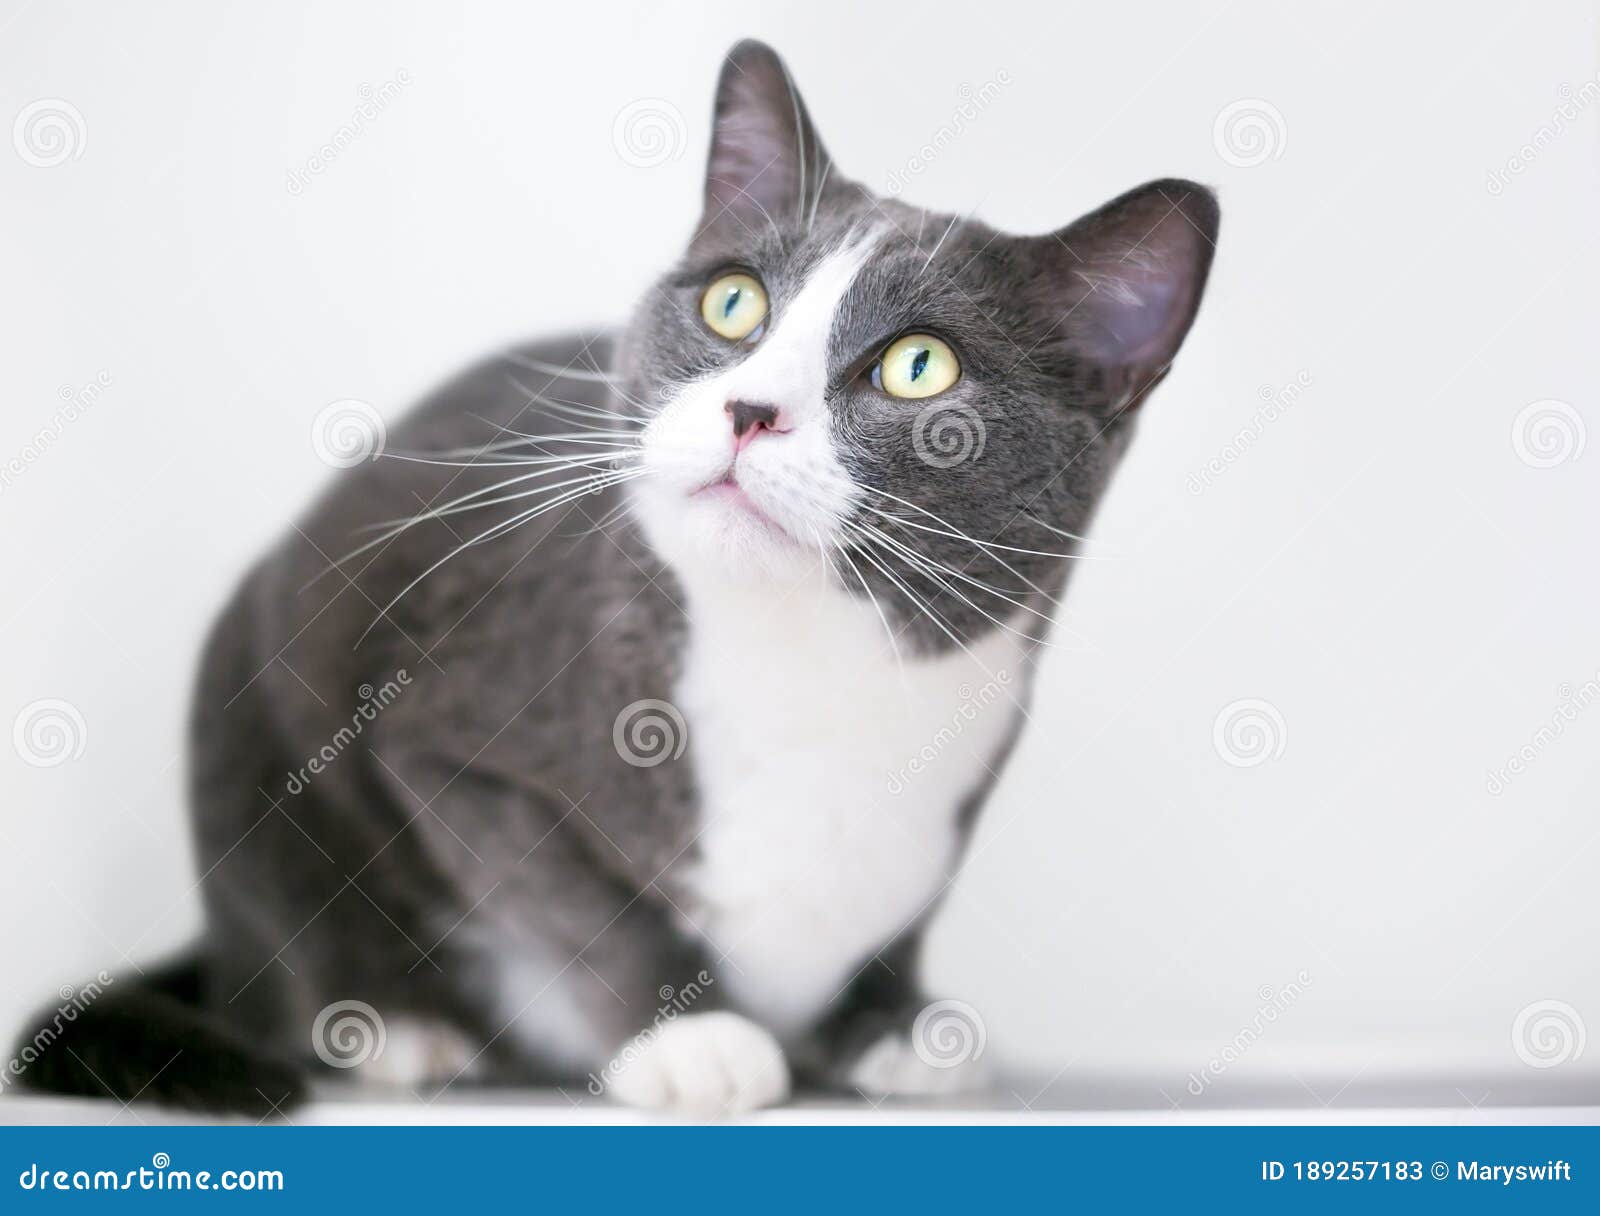 A Gray and White Domestic Shorthair Cat Crouching Stock Image - Image of  animals, adorable: 189257183